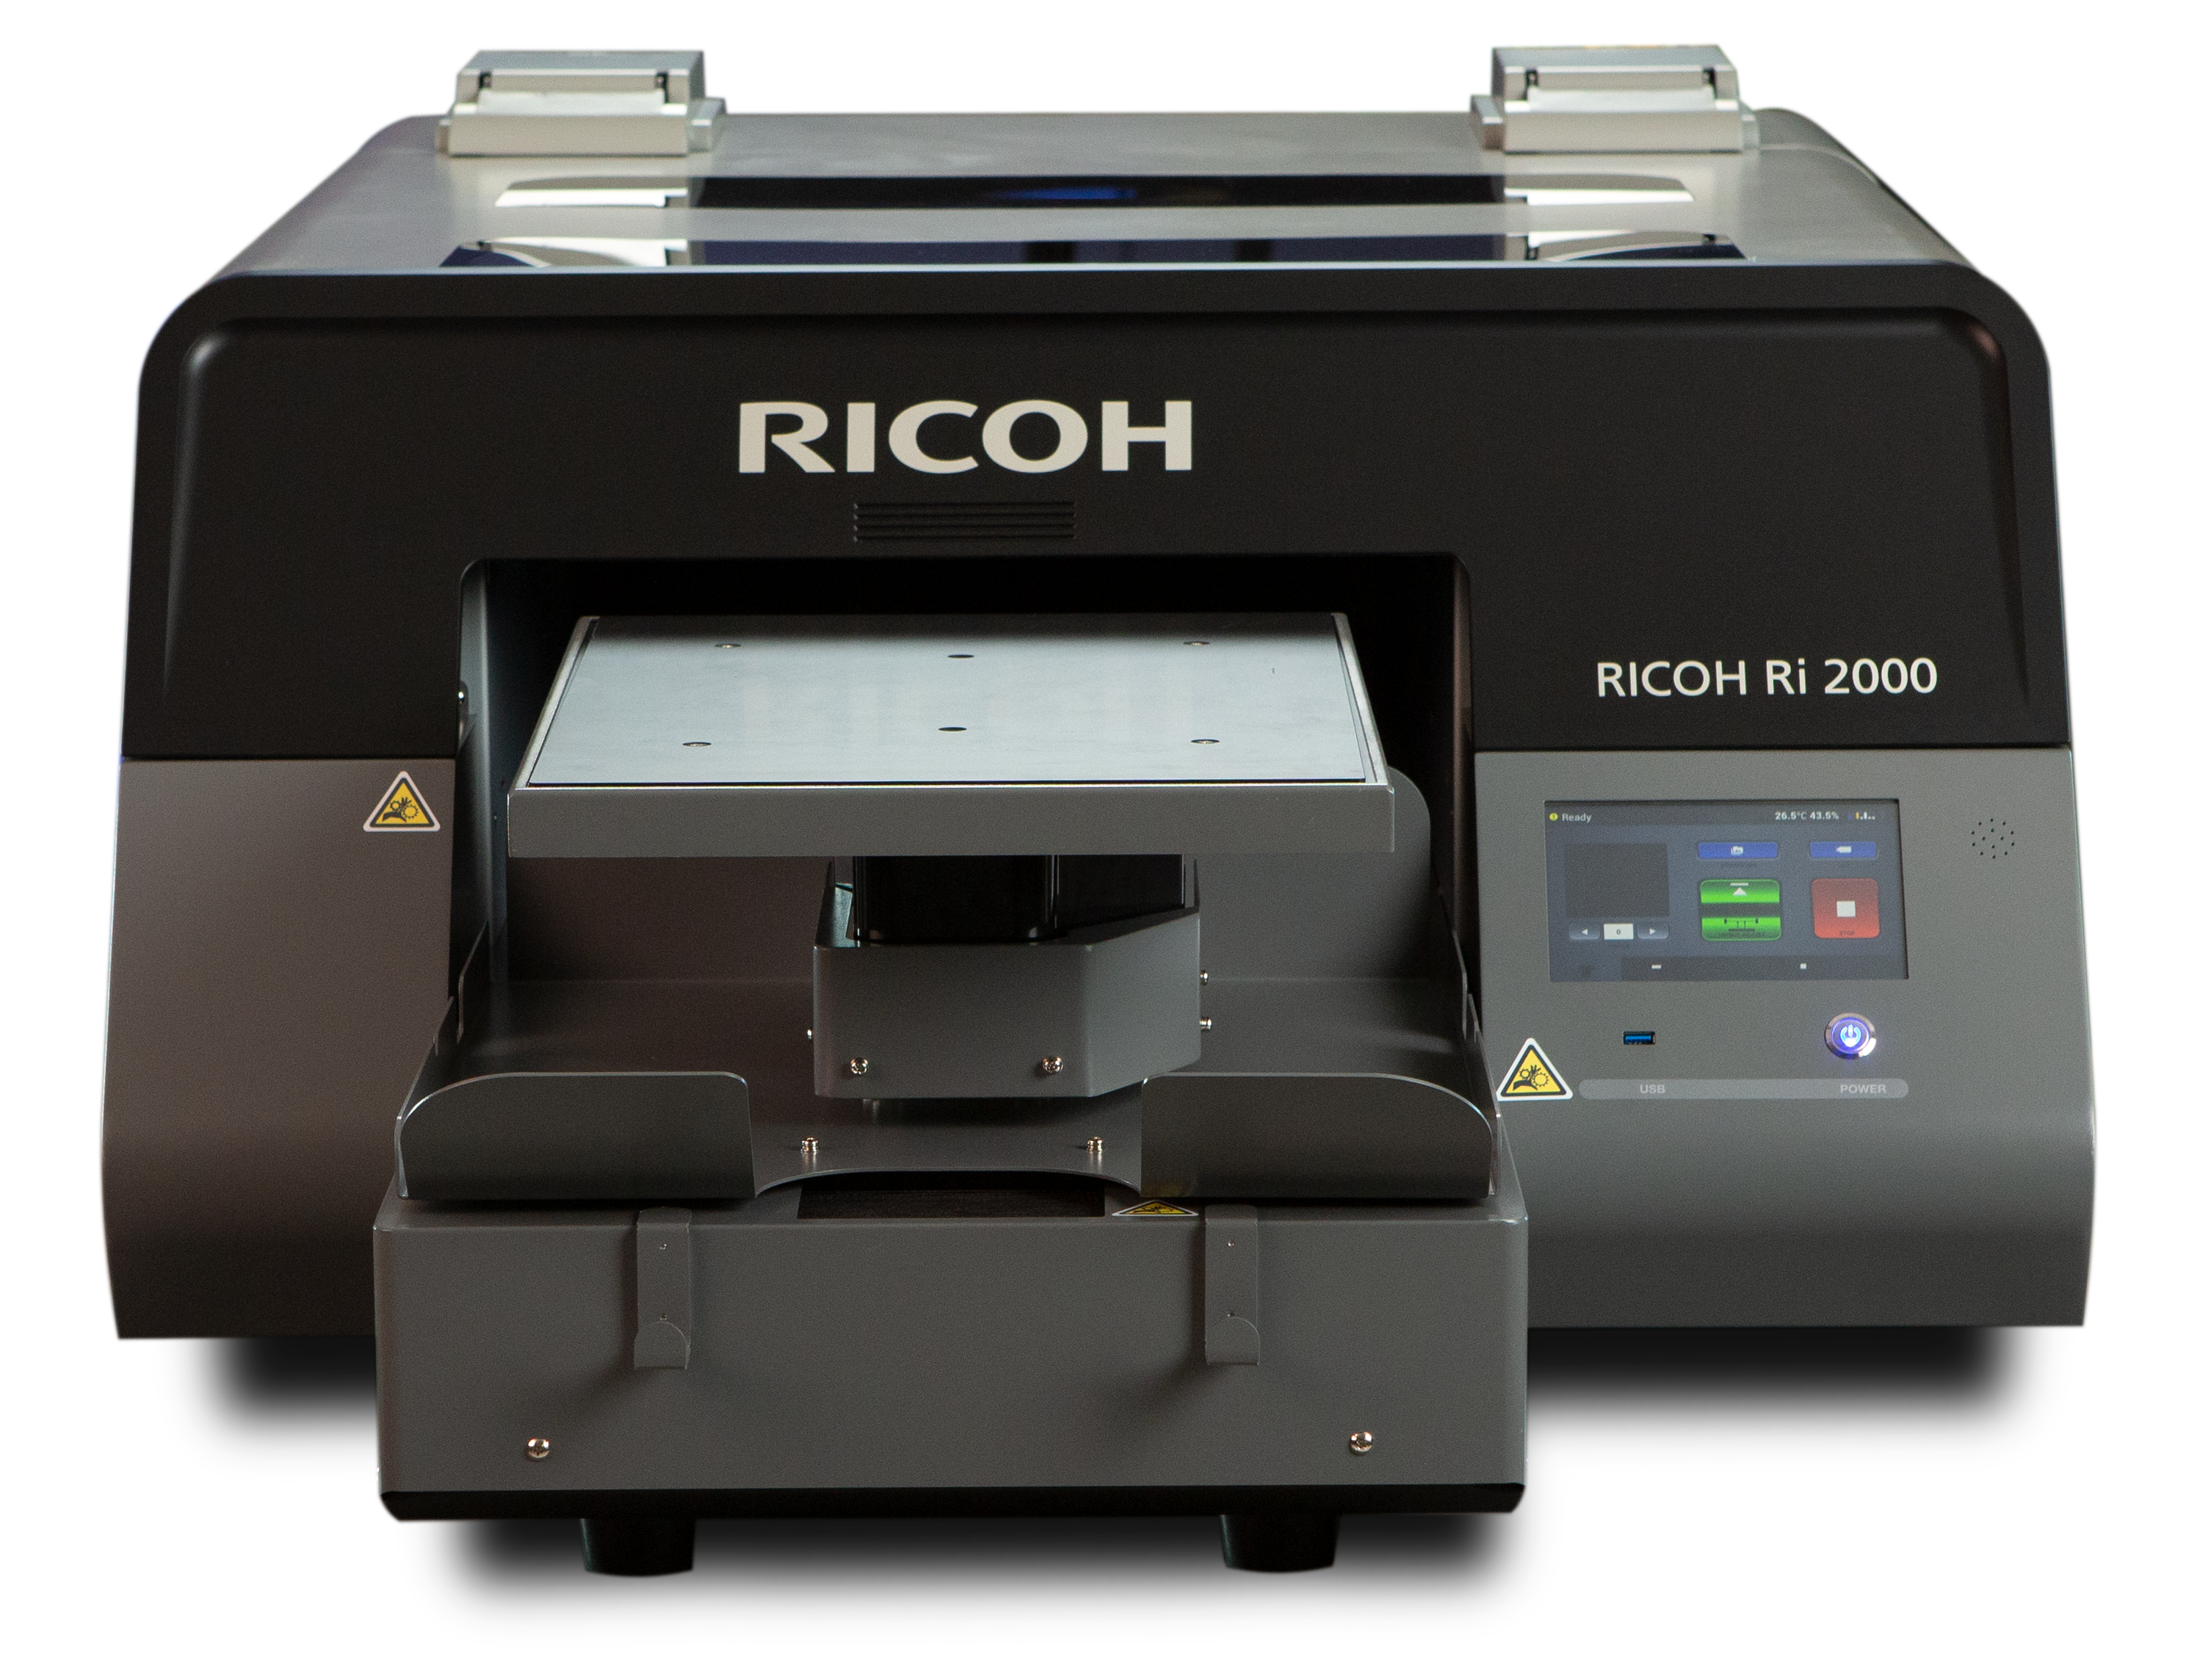 Ricoh next generation Direct to Garment technology offers productivity breakthrough